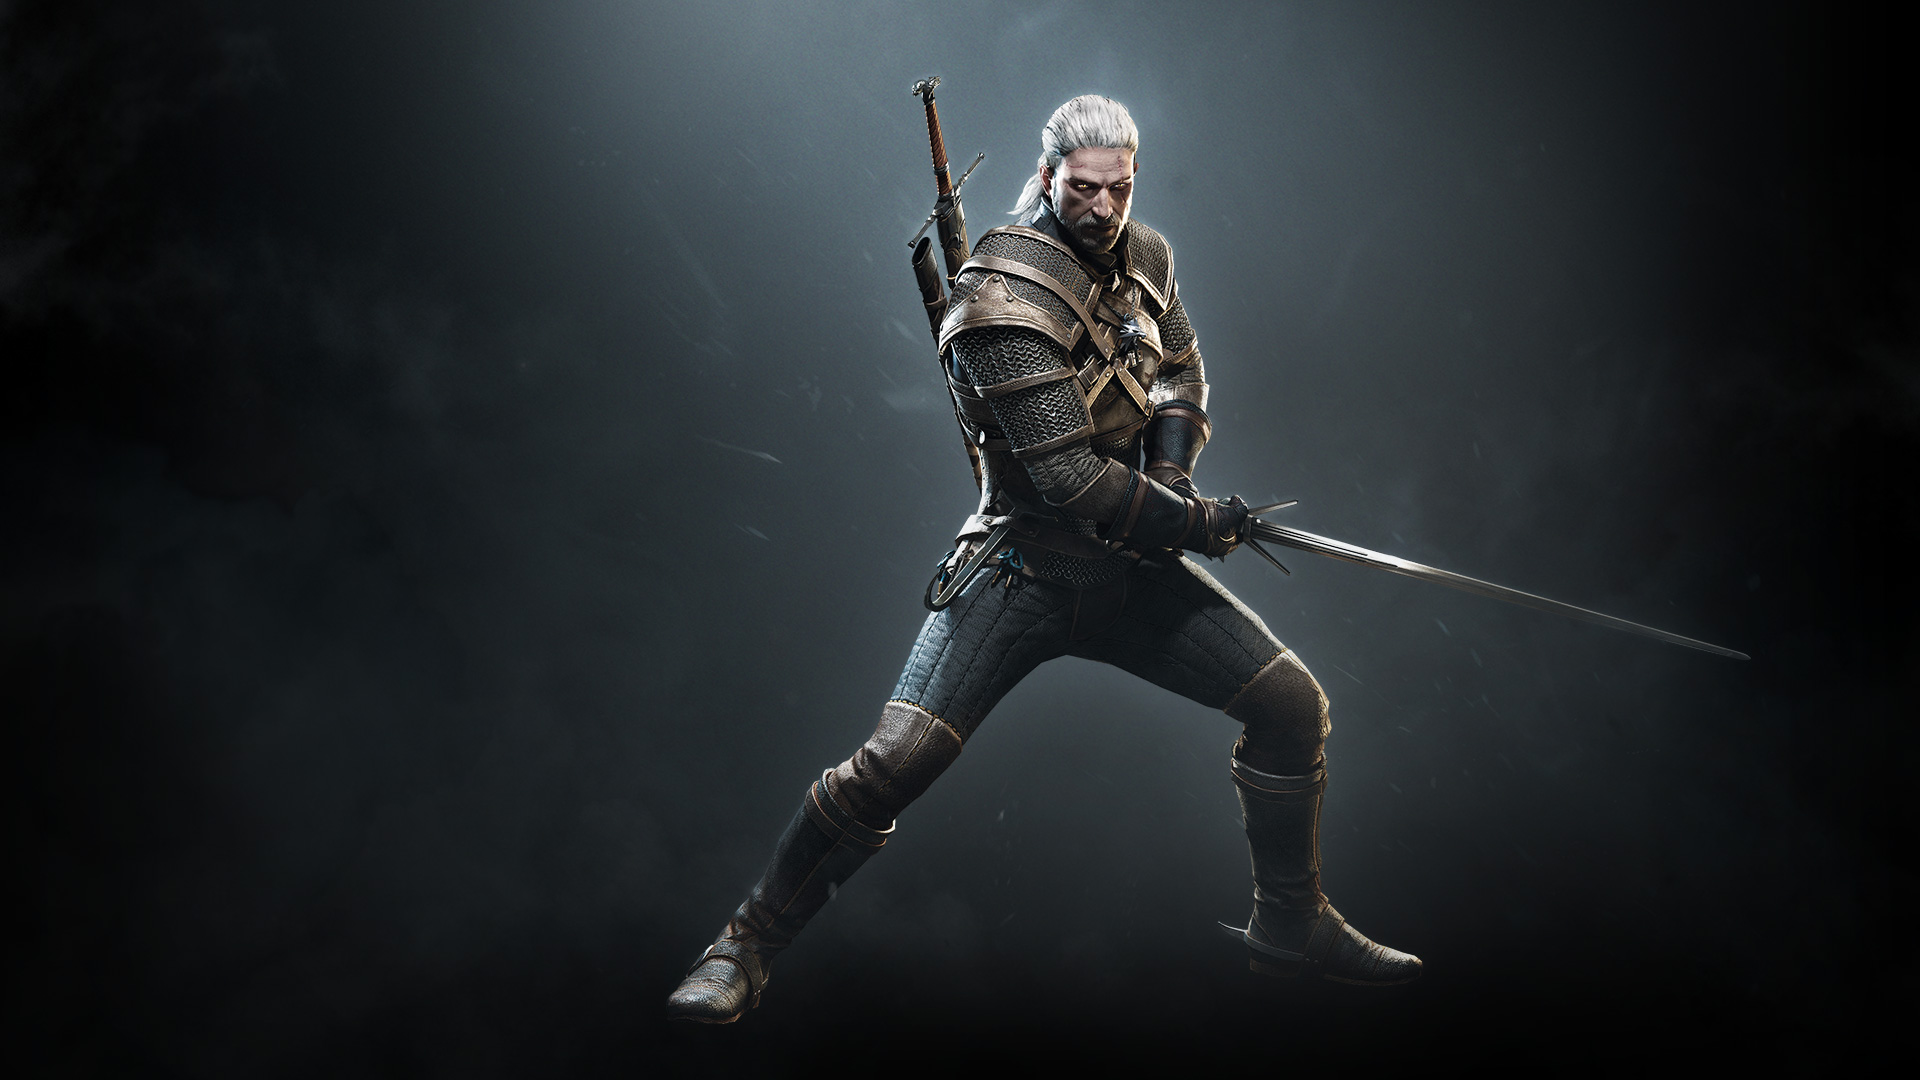 Steam Community :: Guide :: The Witcher - Wallpapers